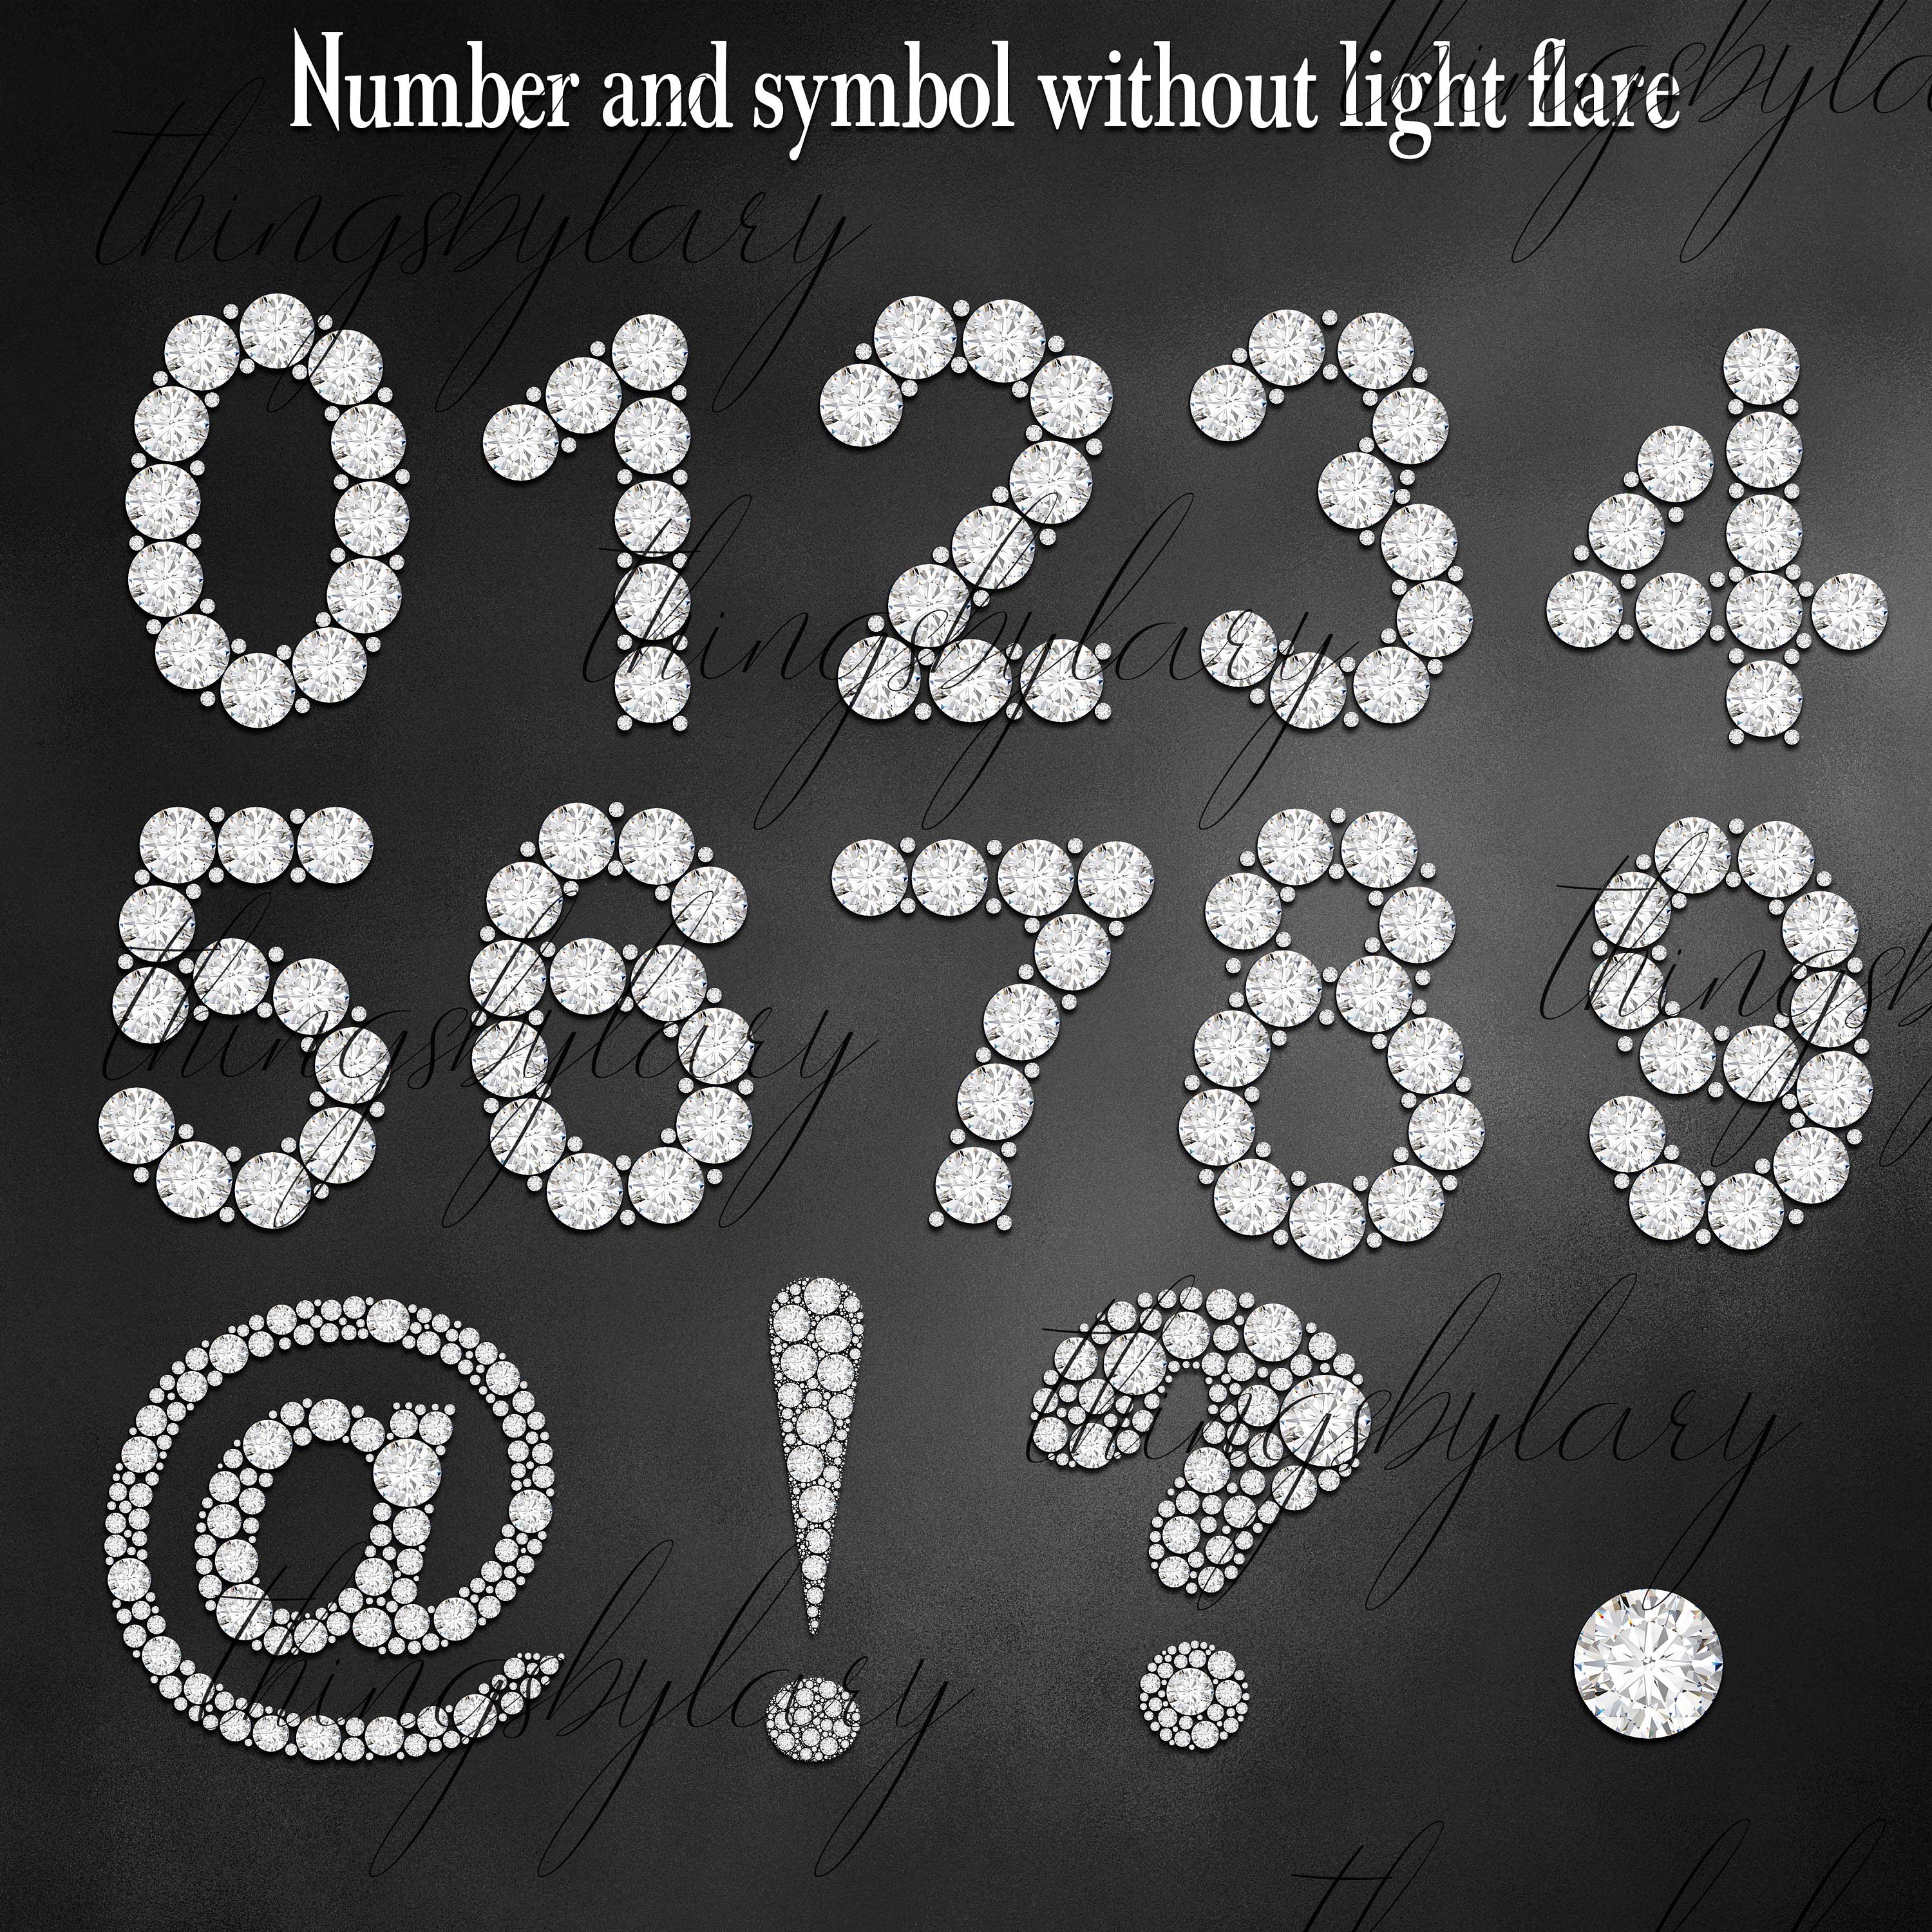 81 Diamond Alphabet Number Symbol Clip Arts (NOT FONT) 300 Dpi PNG Instant Download Commercial Use White Diamond Overlay Number Symbol